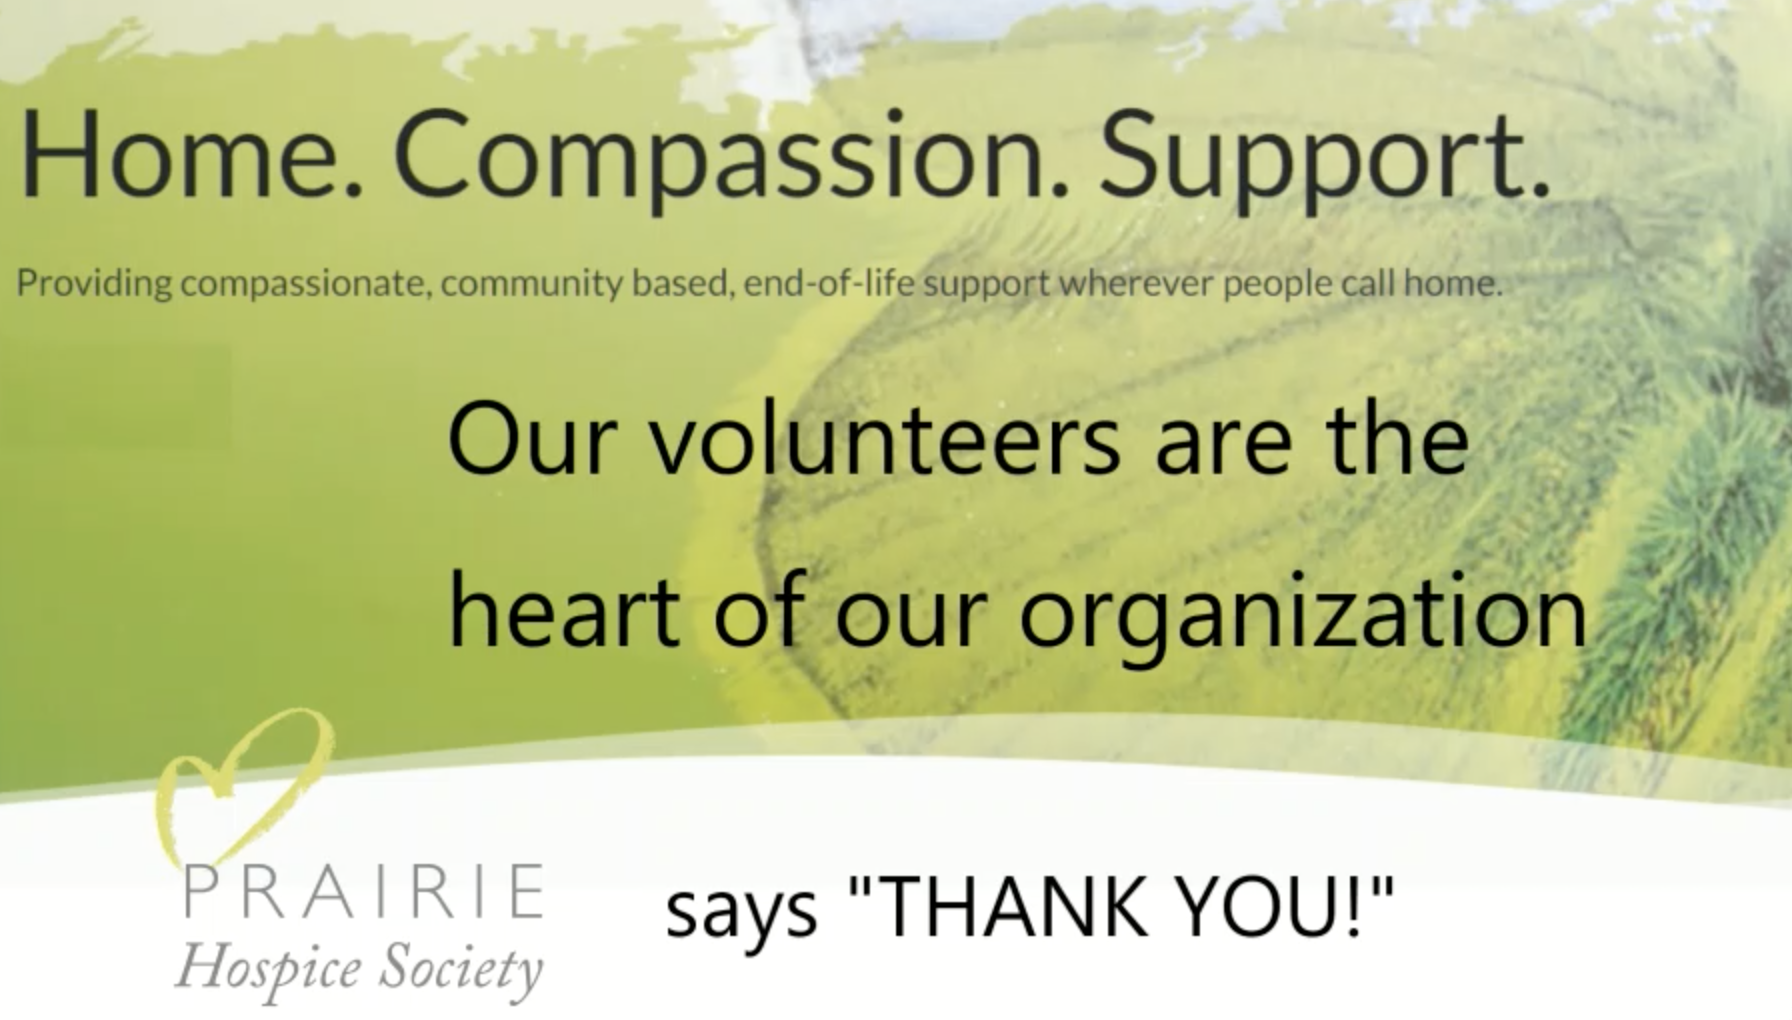 Home. Compassion. Support. Providing compassionate, community based, end-of-life support wherever people call home. Our volunteers are the heart of our organization. Prairie Hospice Society says "THANK YOU!"